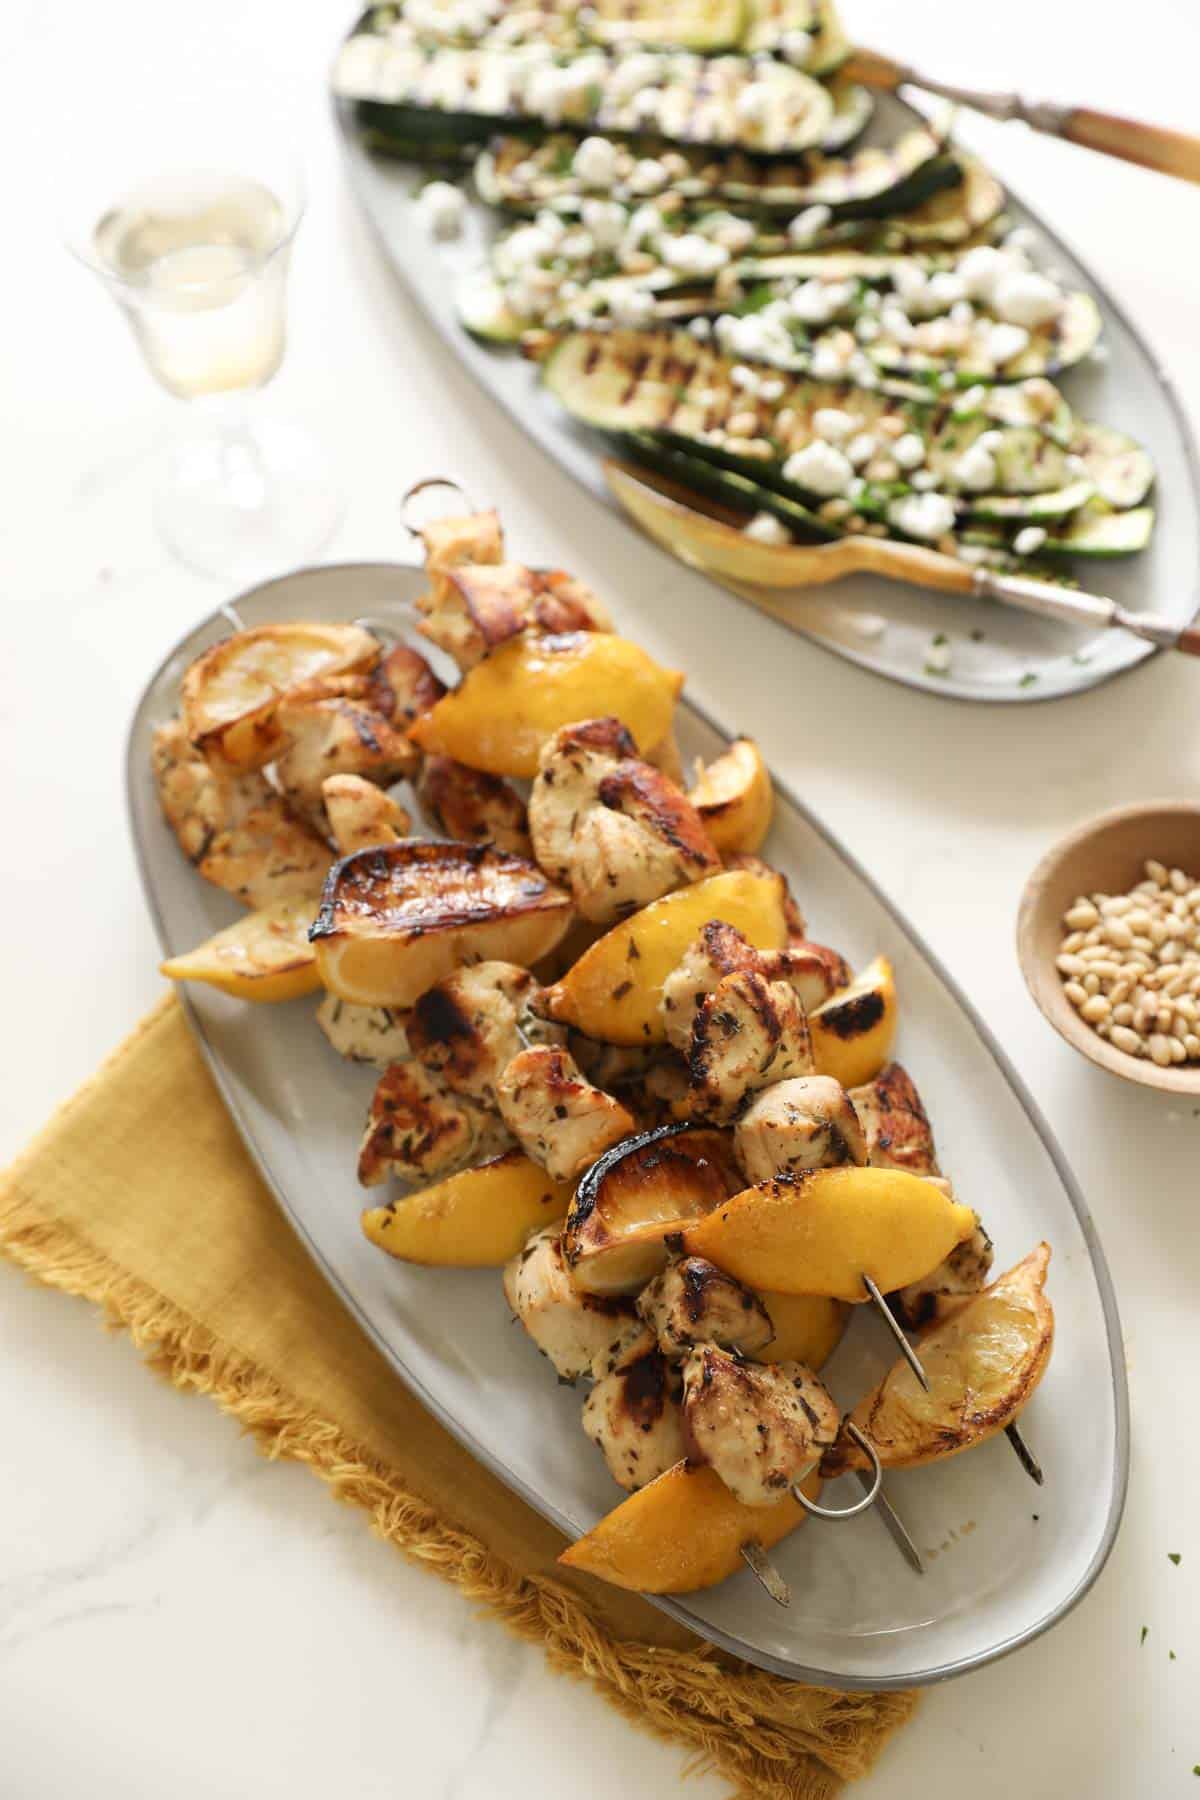 Chicken brochettes grilled with lemon and a zucchini salad